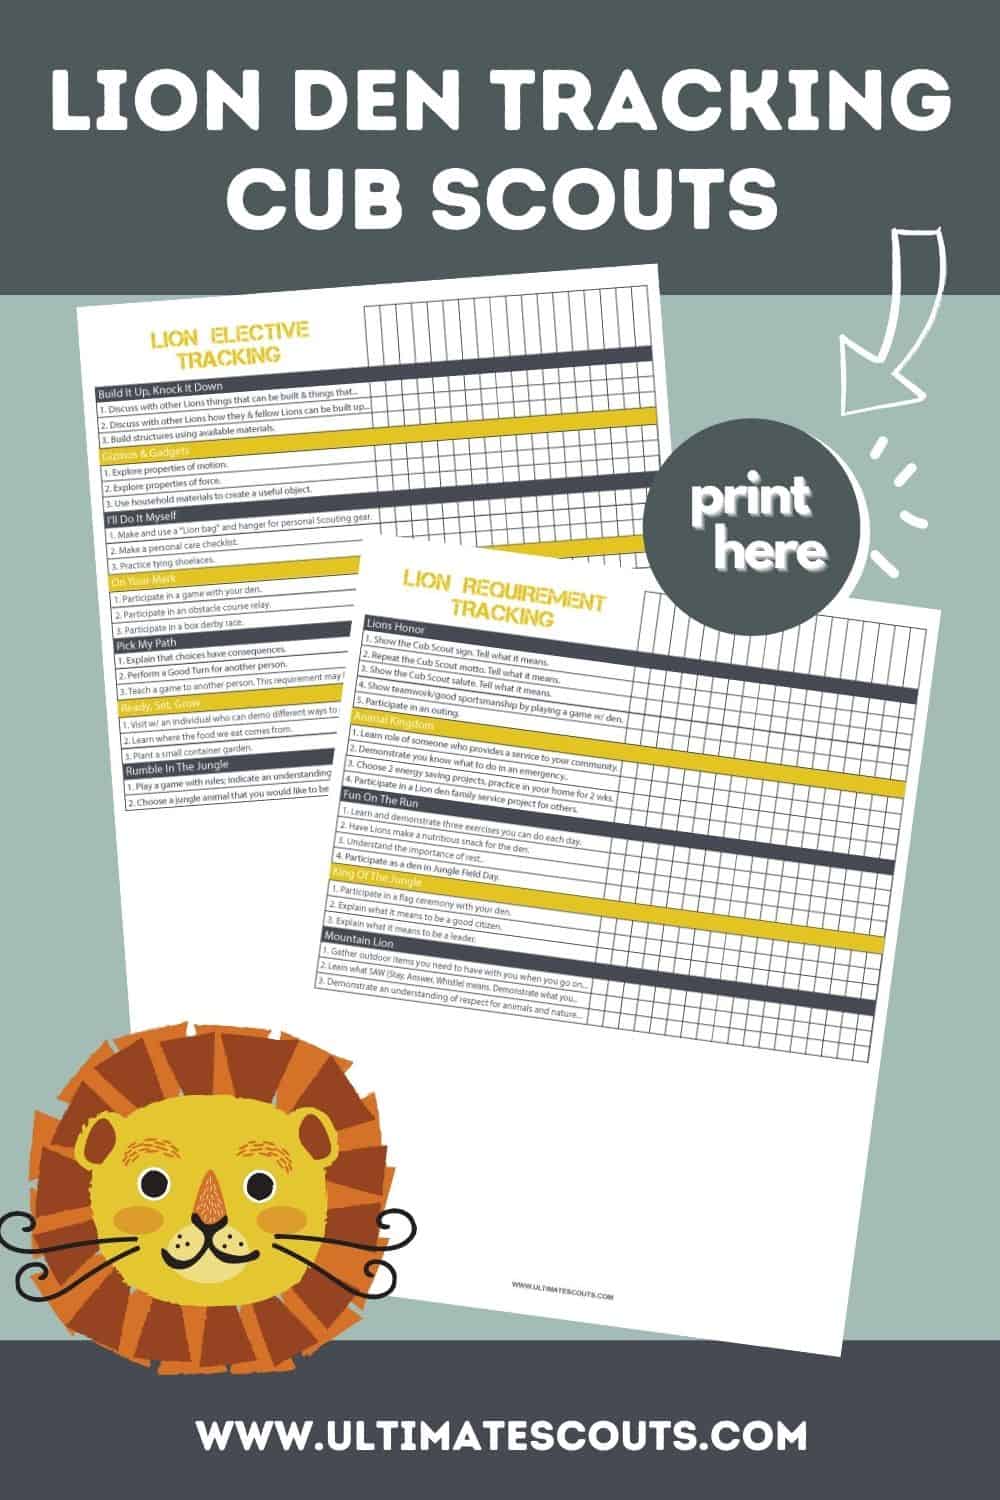 Lion Scout Den Tracking Checklist (Free Printable)